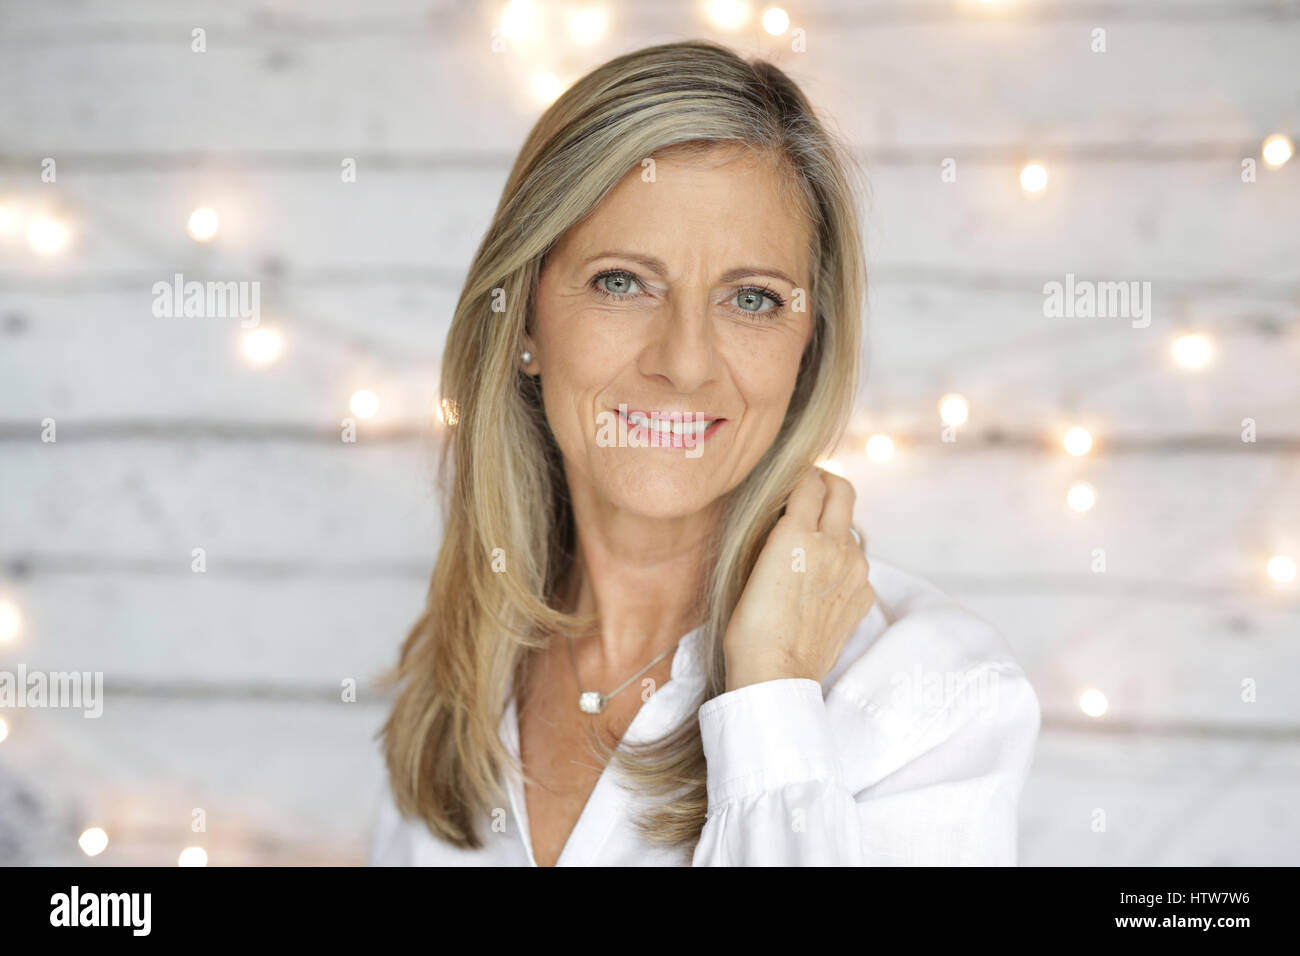 Portrait of a middle-aged woman Stock Photo